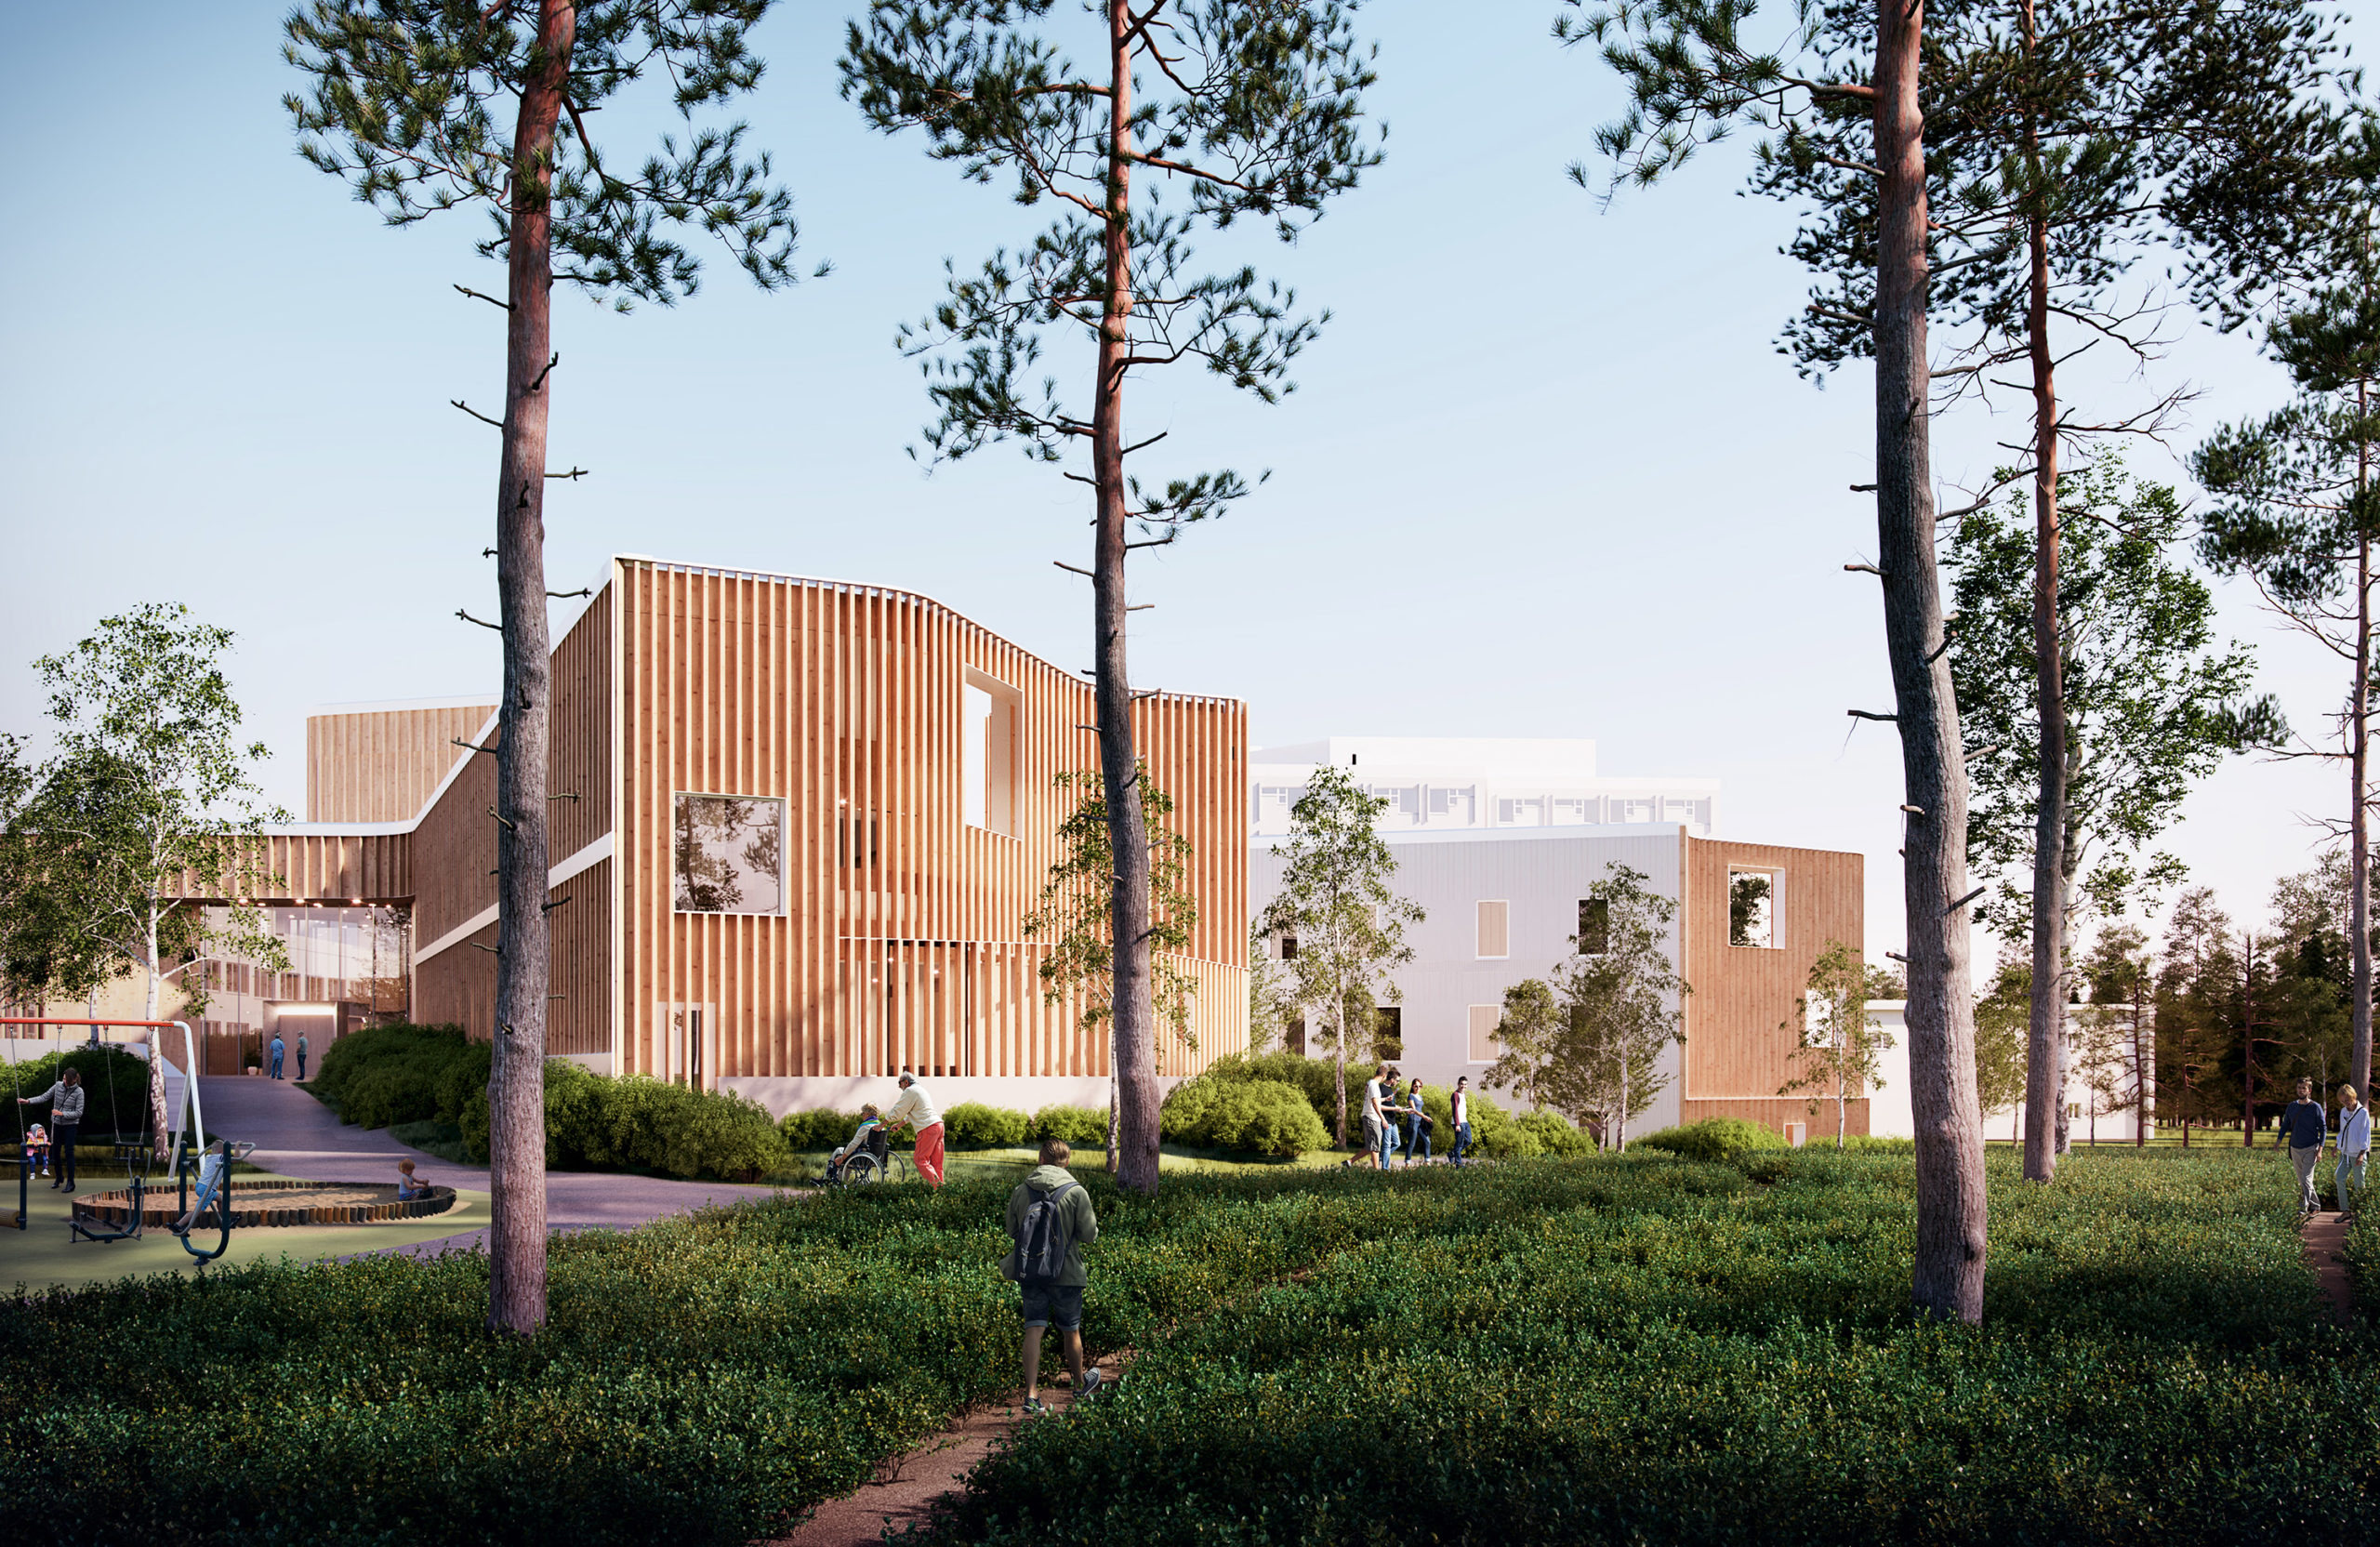 The pshychiatric hospital of the Lapland Central Hospital designed by Verstas Architects